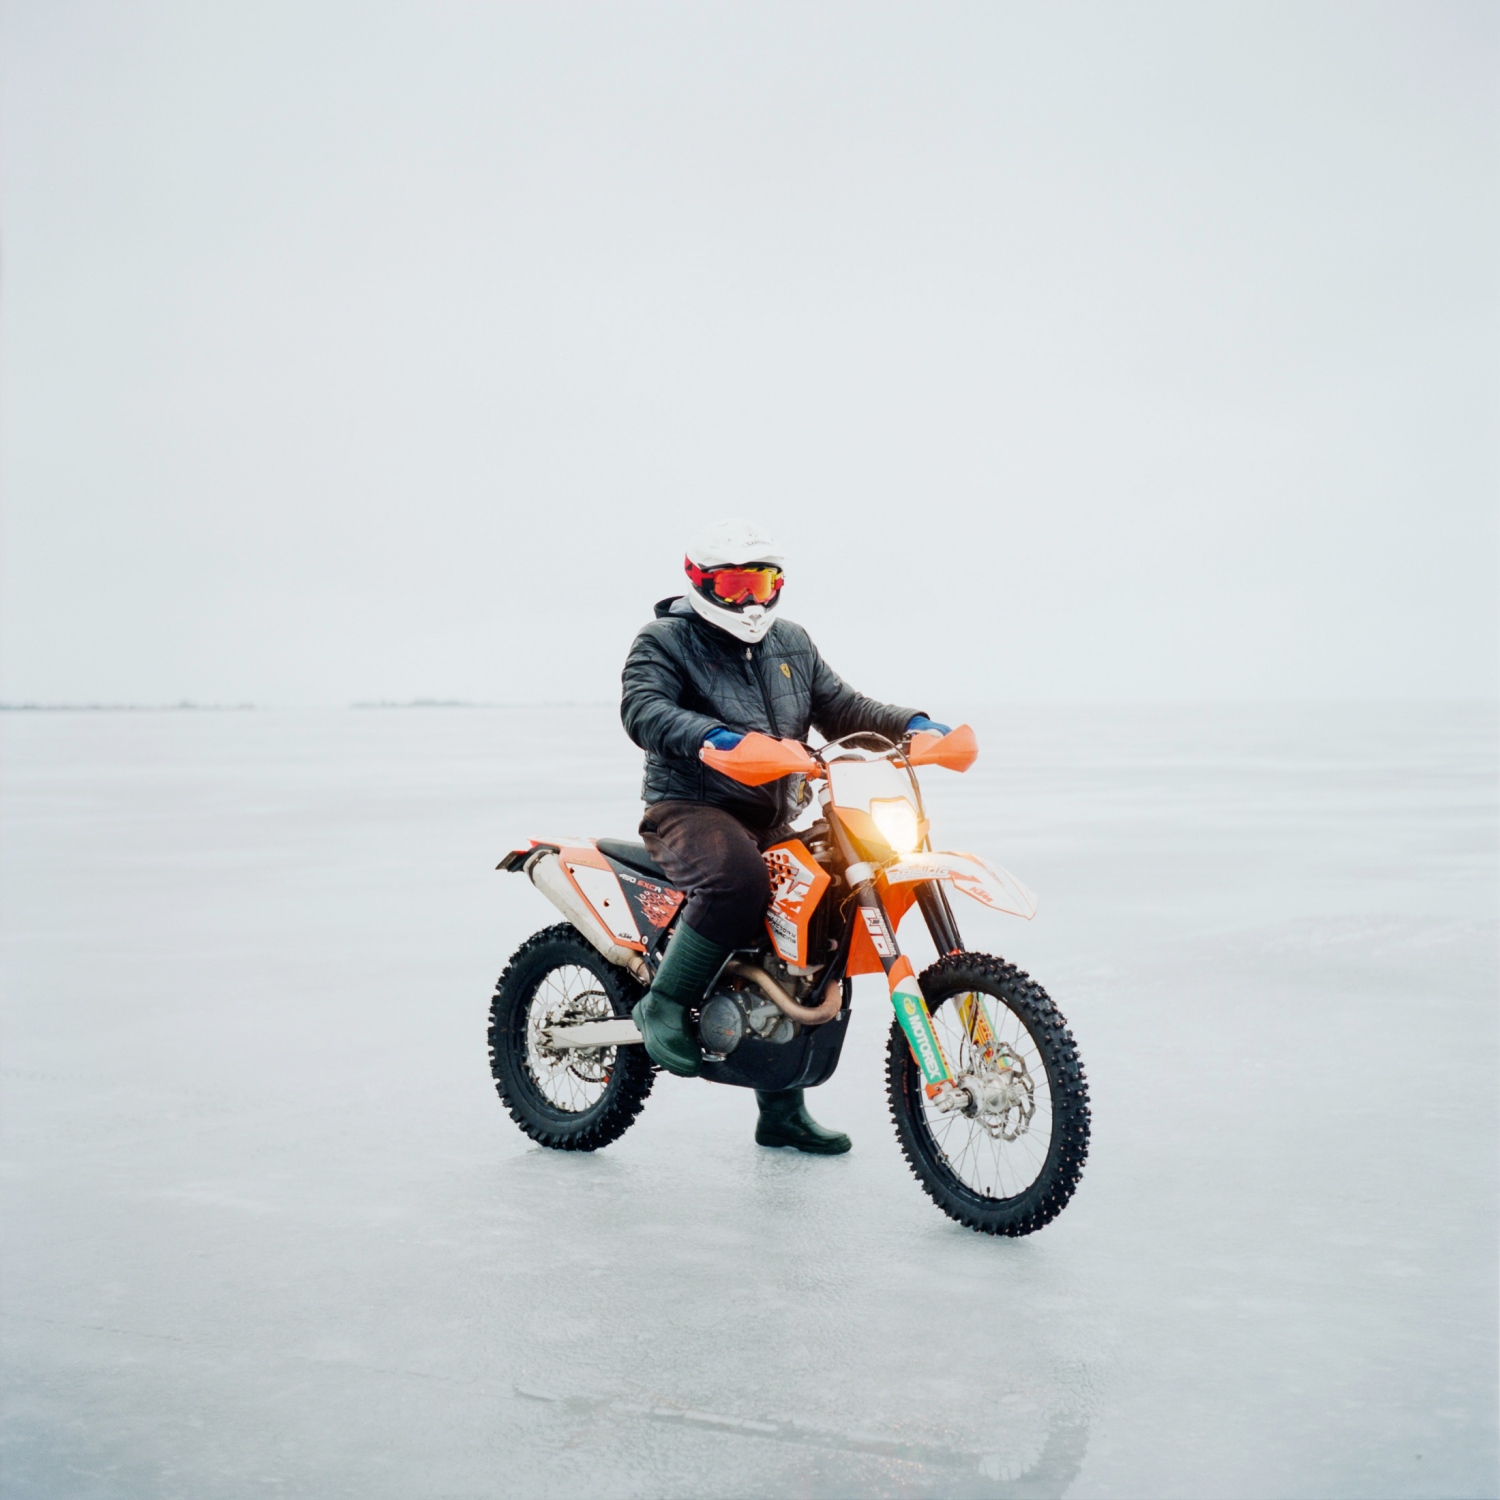 The L&auml;mmij&auml;rv lake, a natural border between Estonia and Russia. The border runs through the middle of this lake, where this biker plays on the Estonian side of the border.